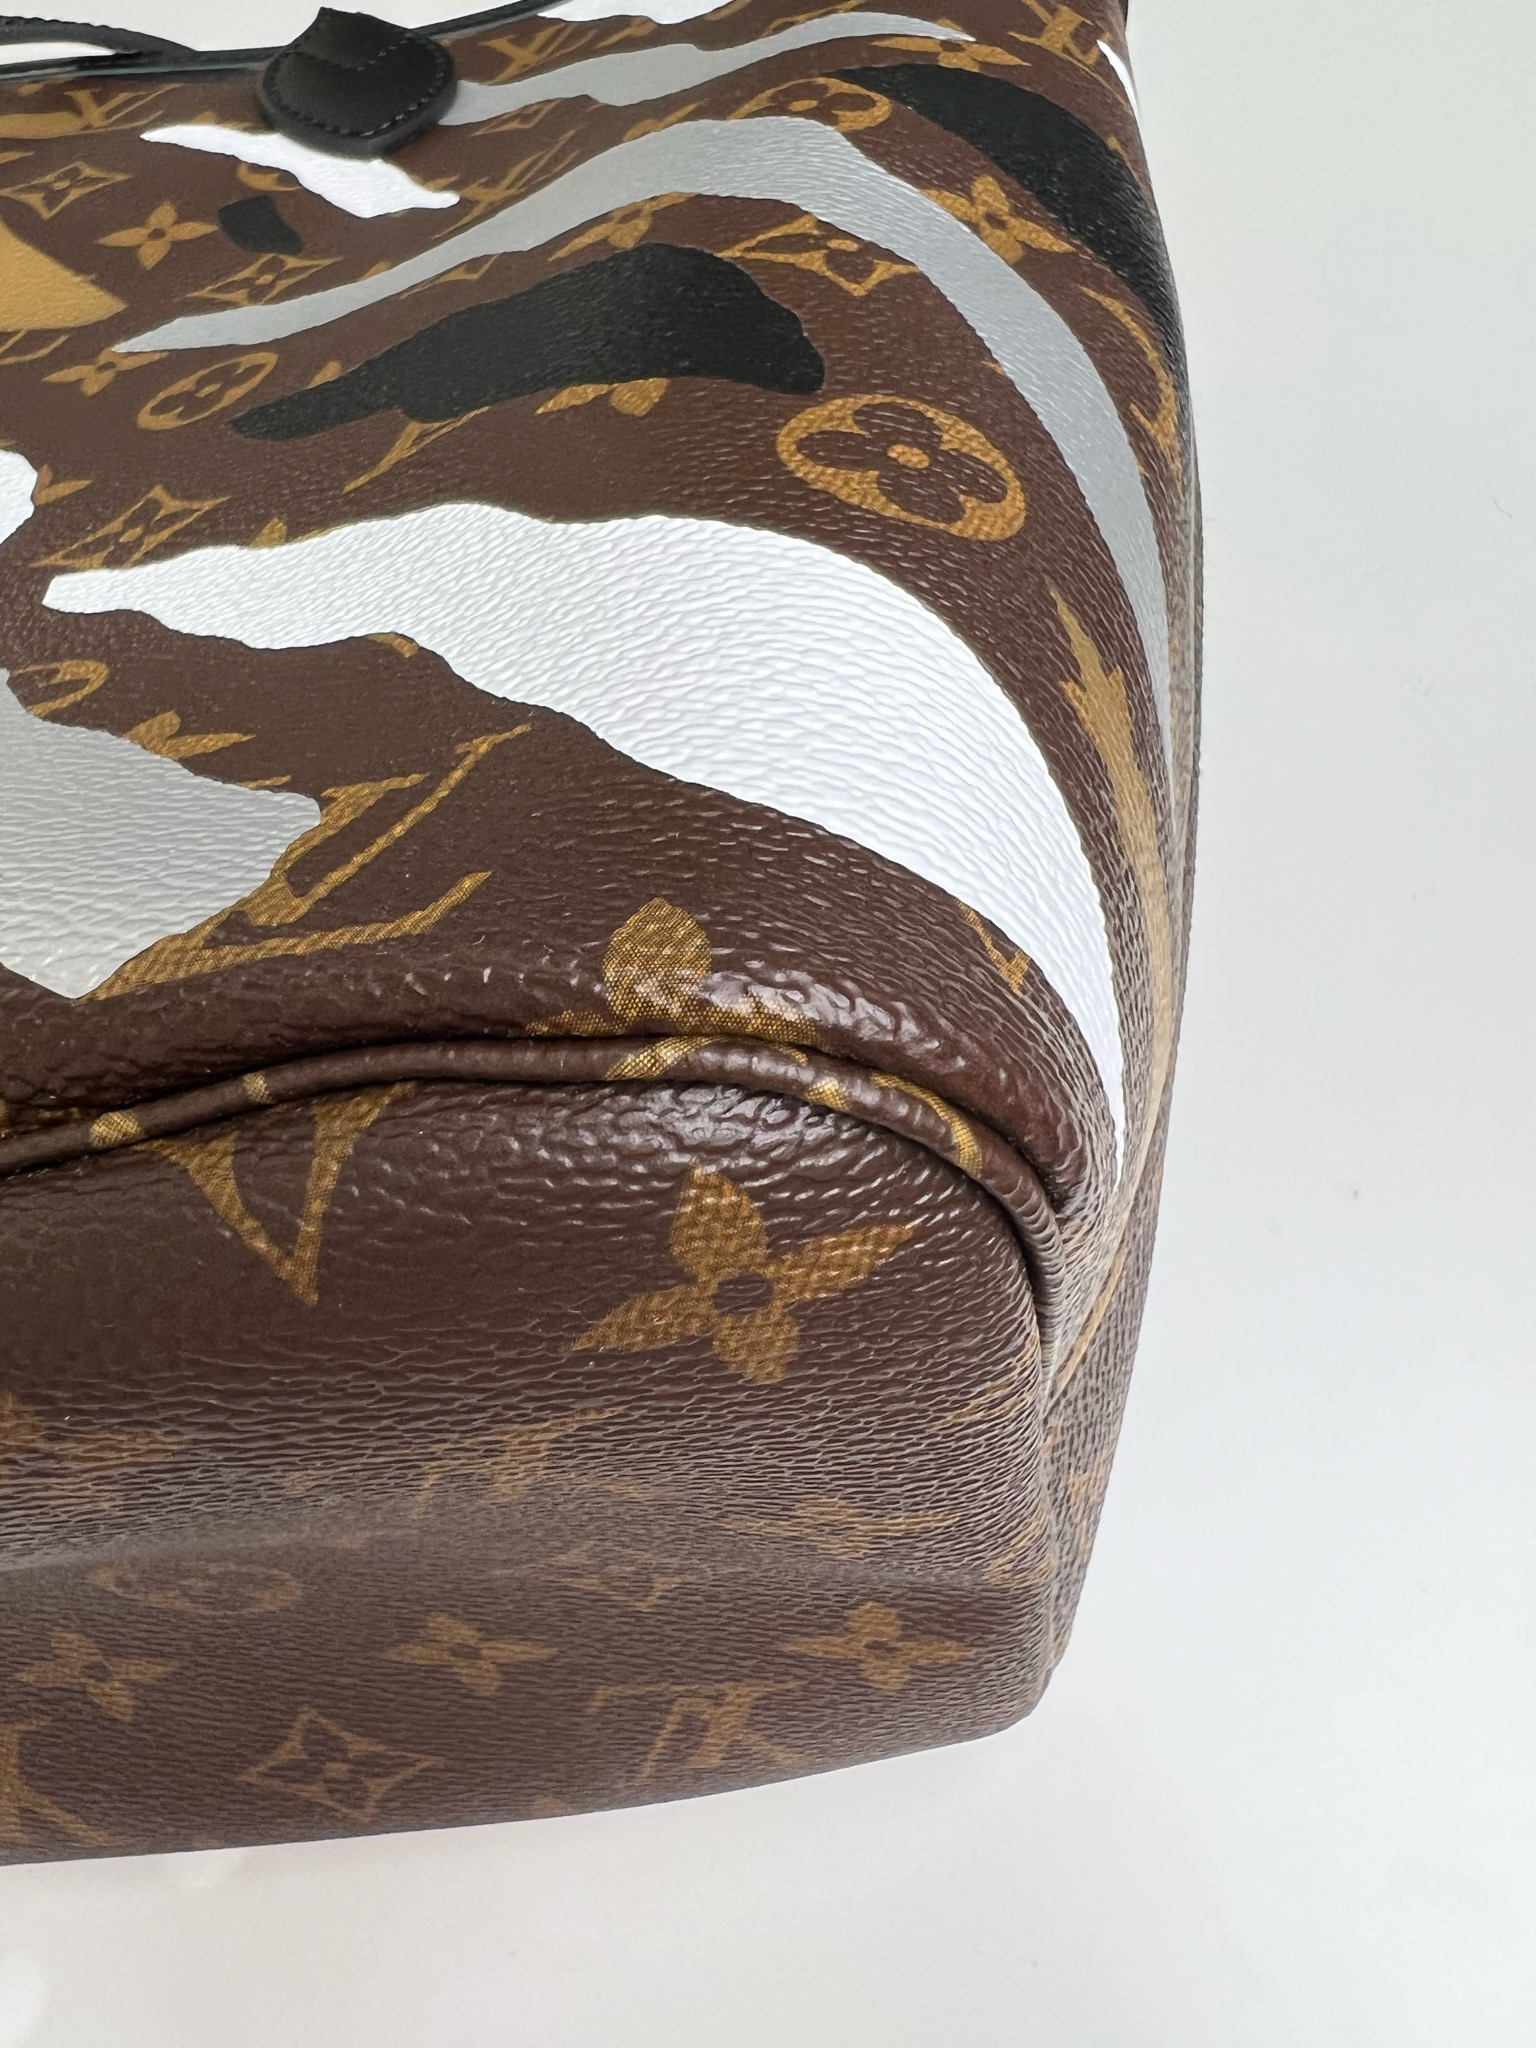 Louis Vuitton Neverfull League of Legends Limited Edition with wristlet, in  dustbag, box - Julia Rose Boston